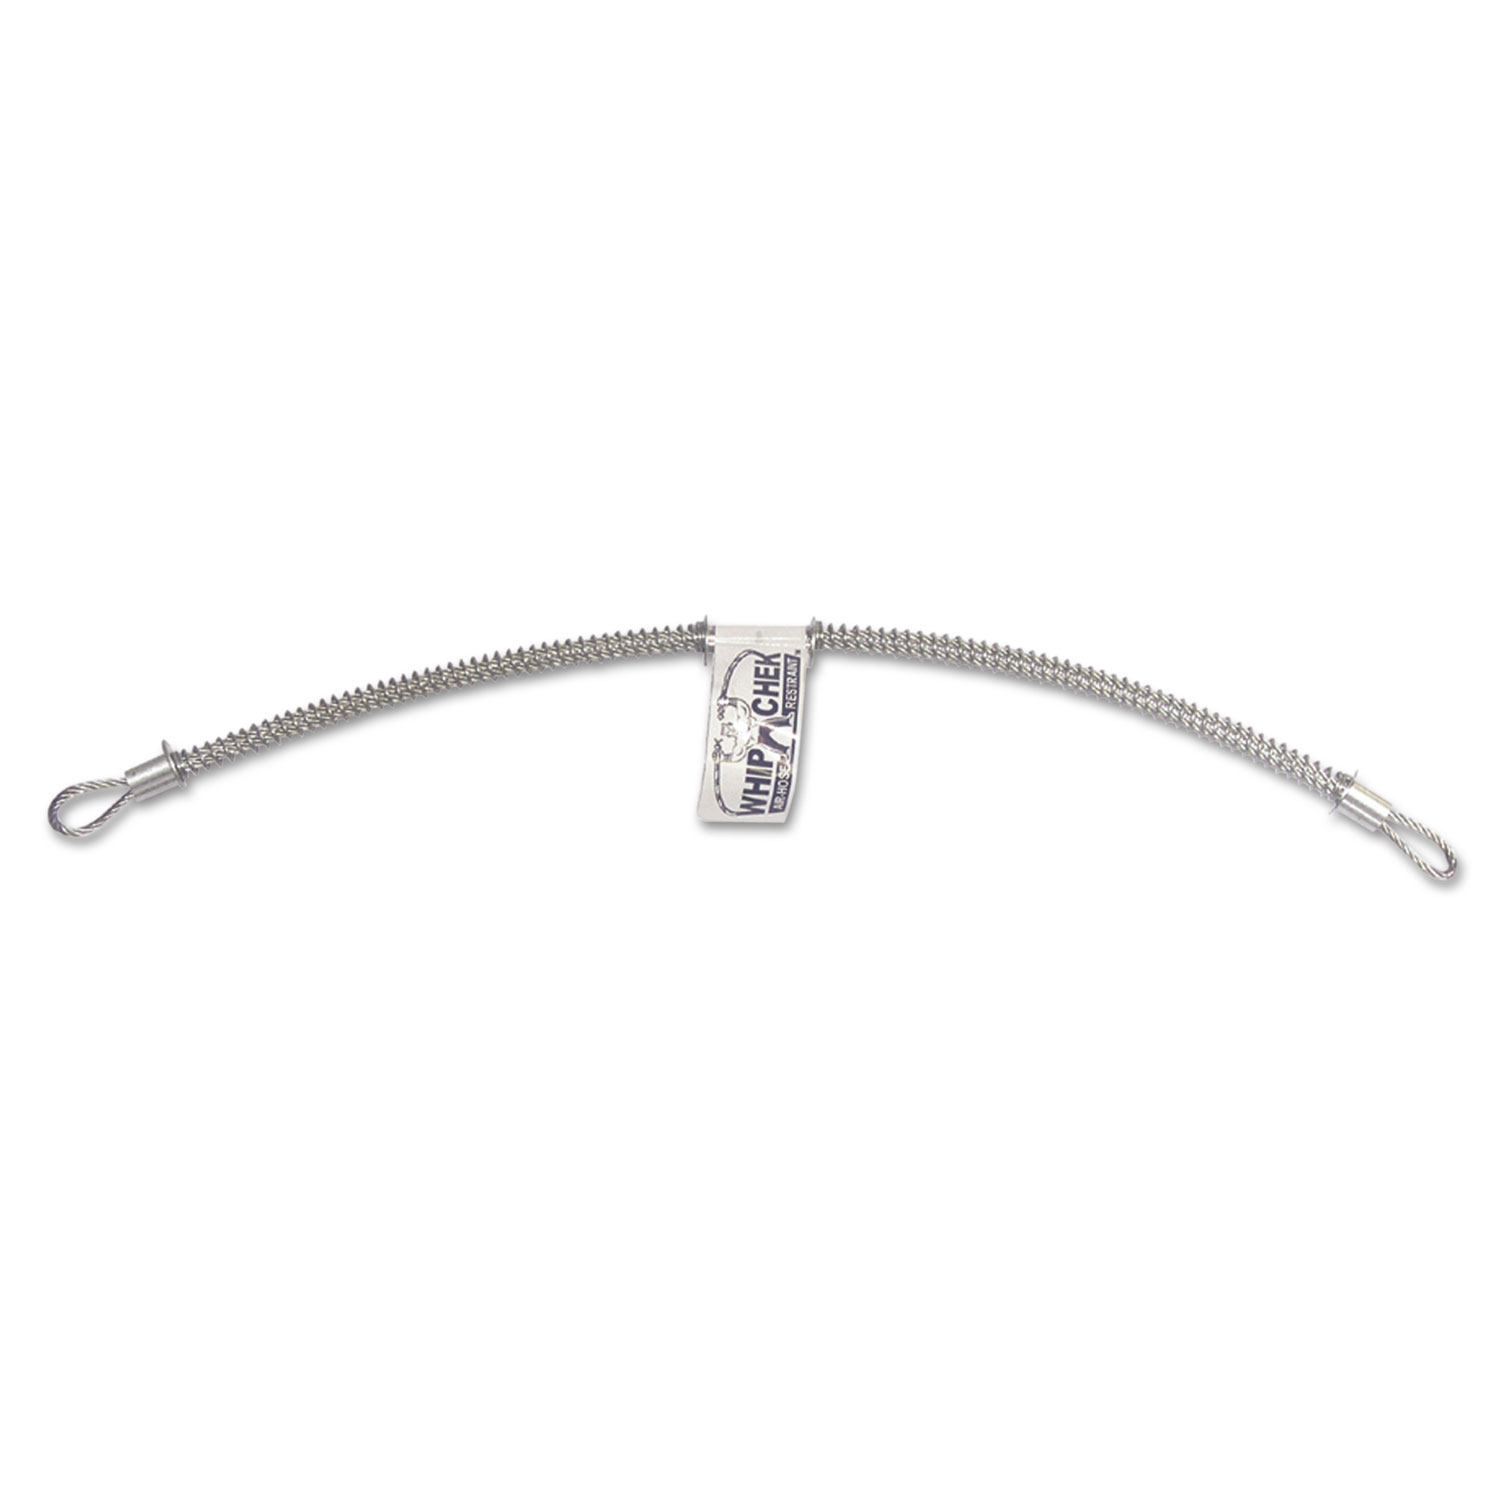  Dixon WB1 Whipchek Safety Cable, 1/8 x 20 1/4 (DXVWB1) 